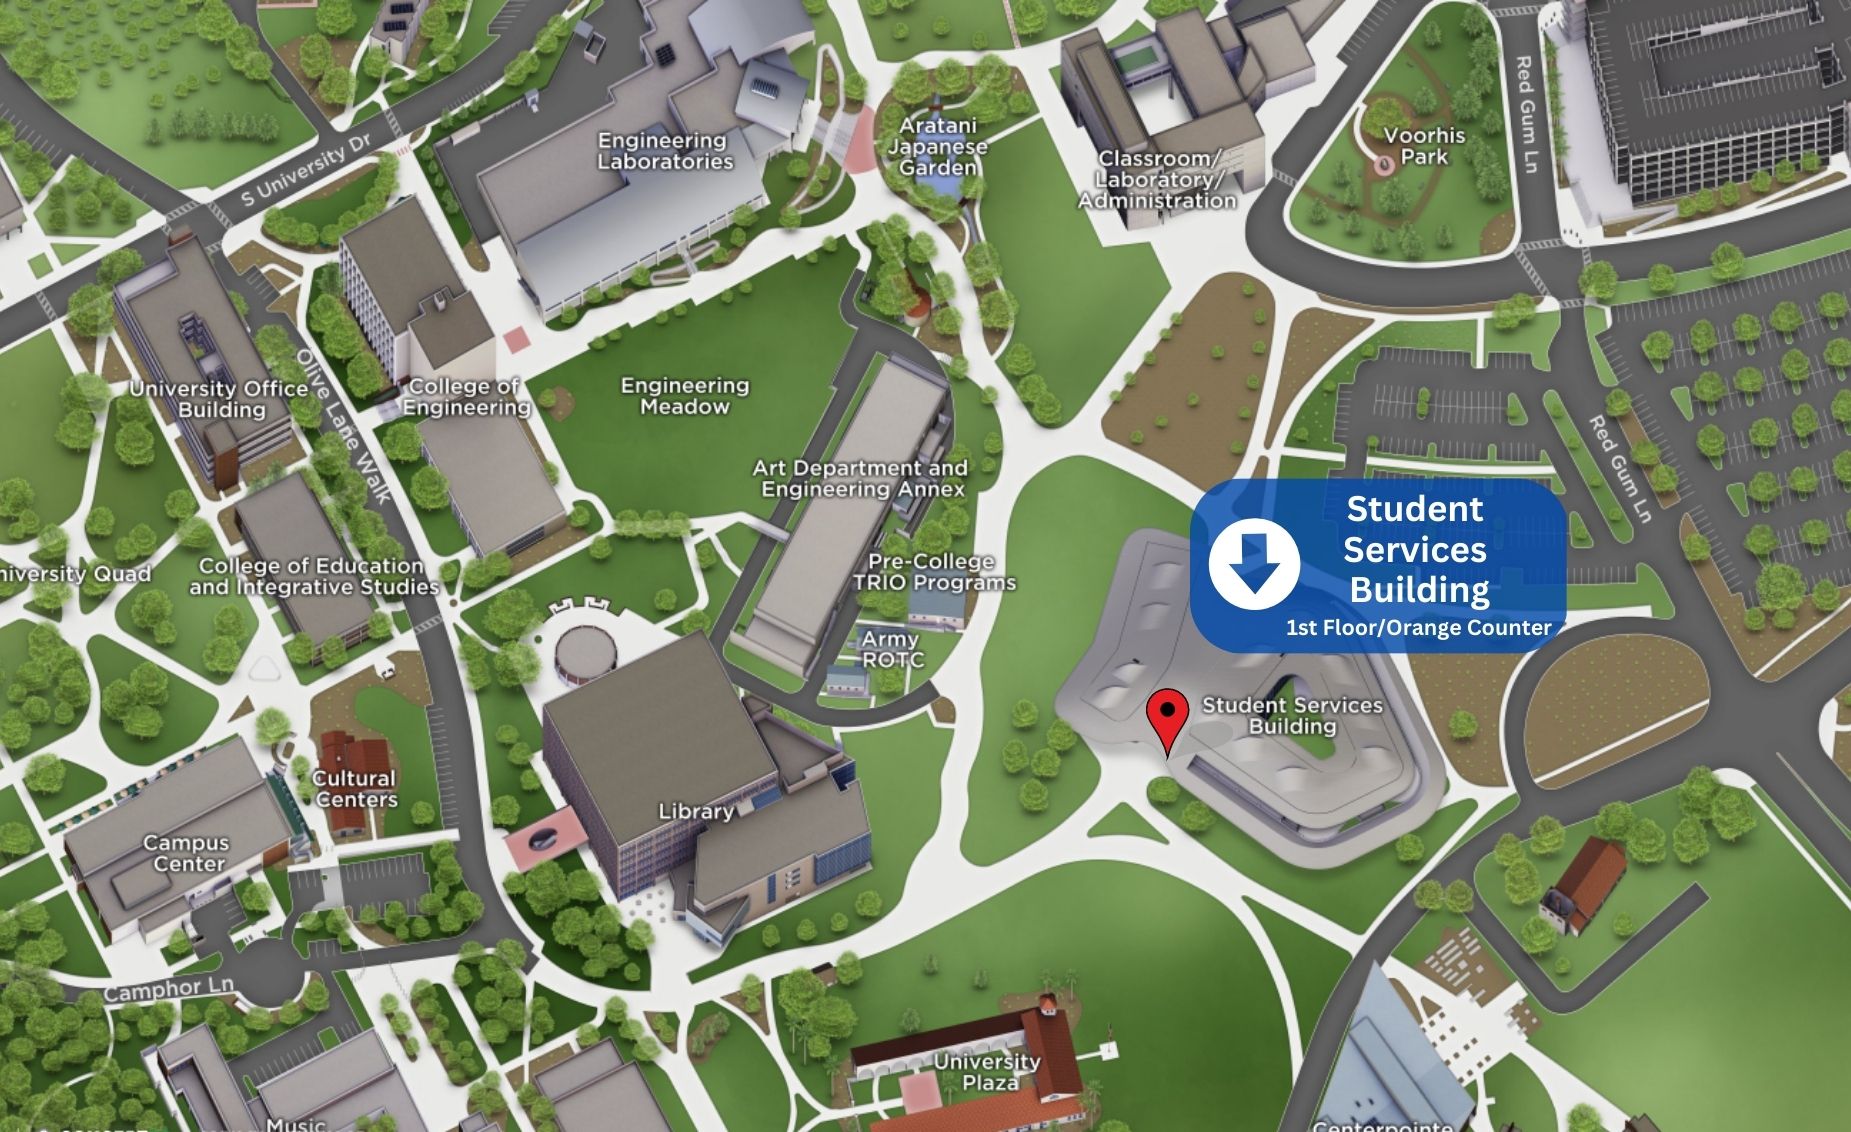 Screenshot of Student Services Building on campus map with arrow pointing to the building